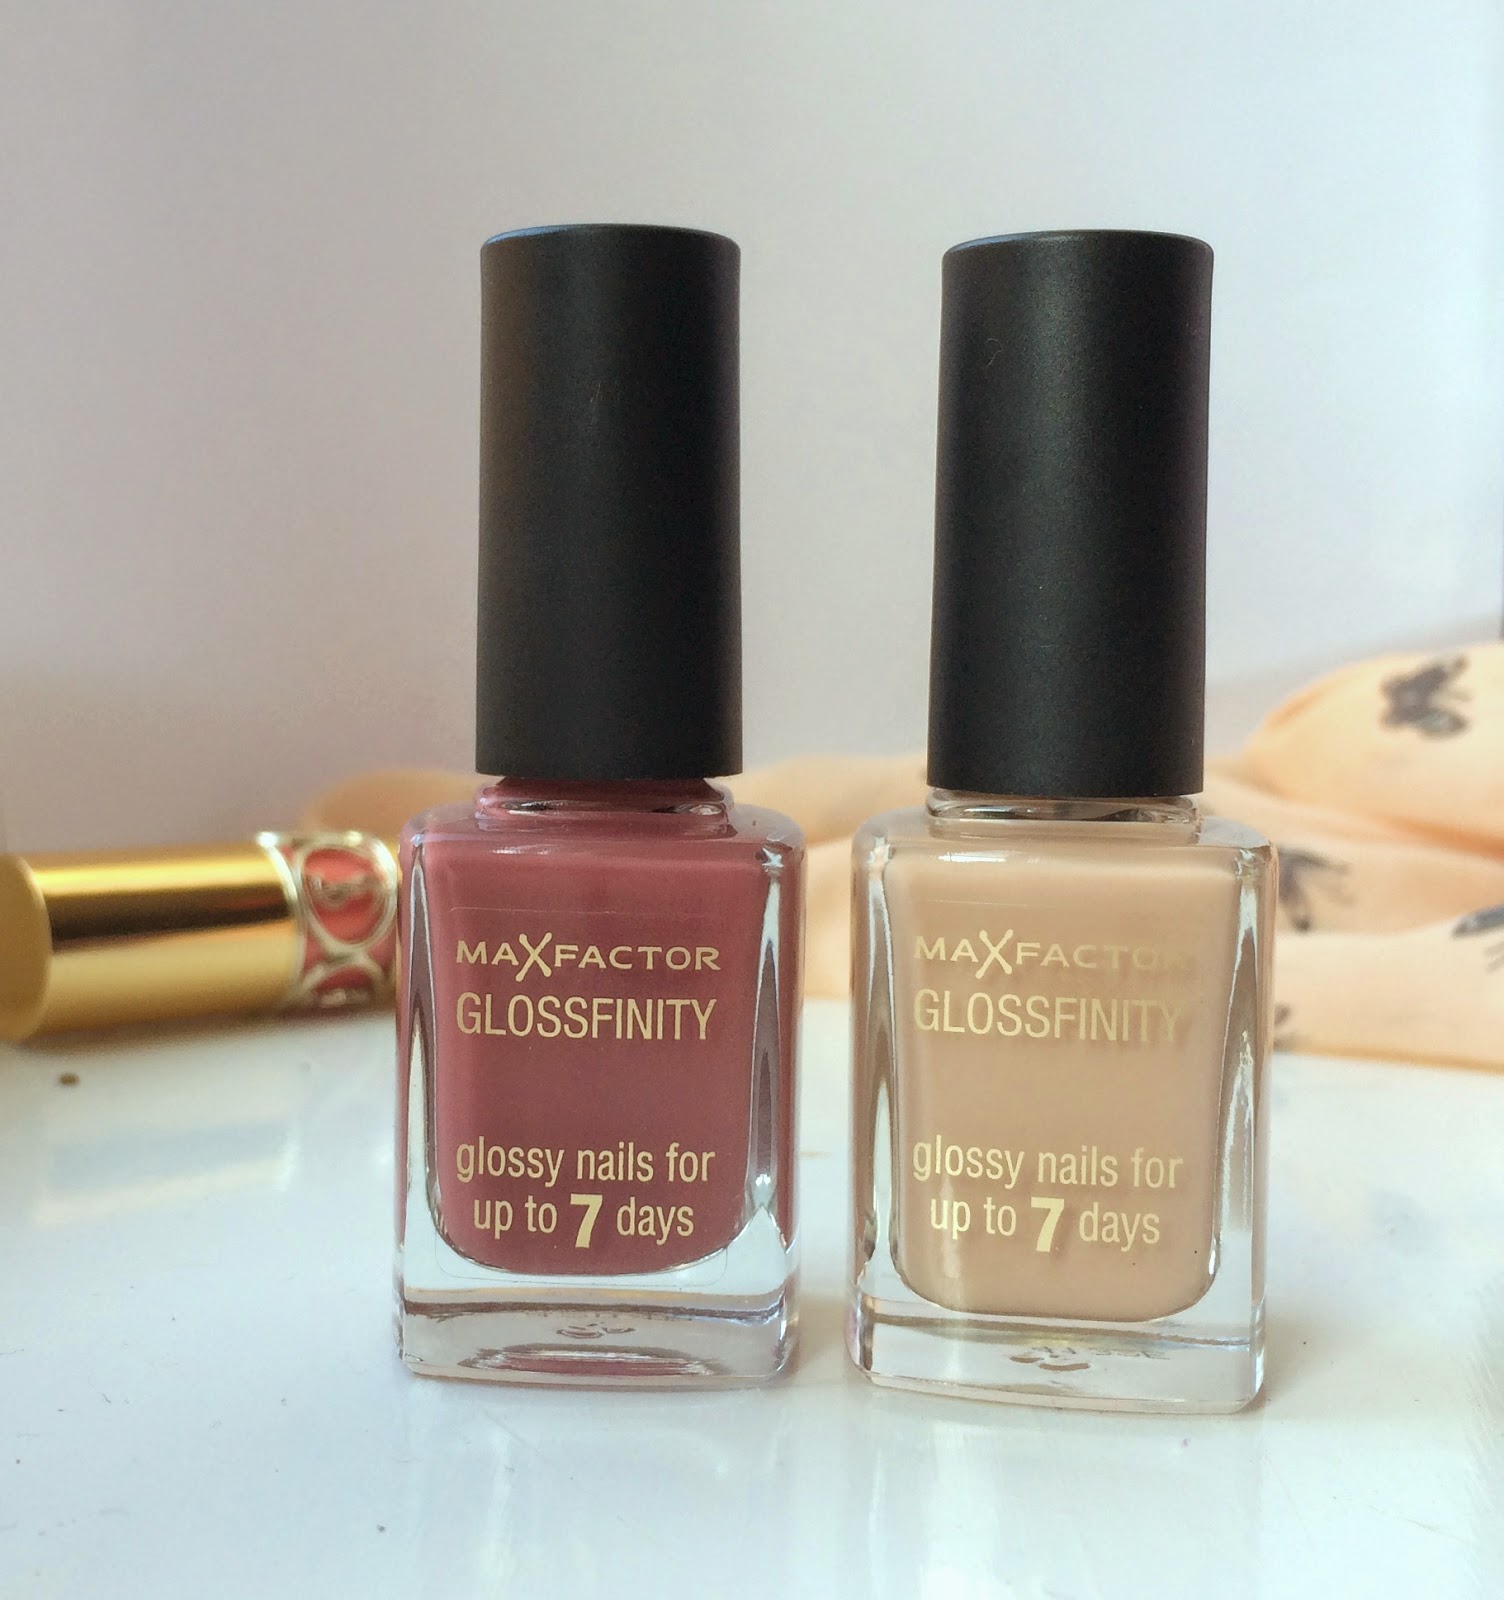 max-factor-glossfinity-candy-rose-desert-sand